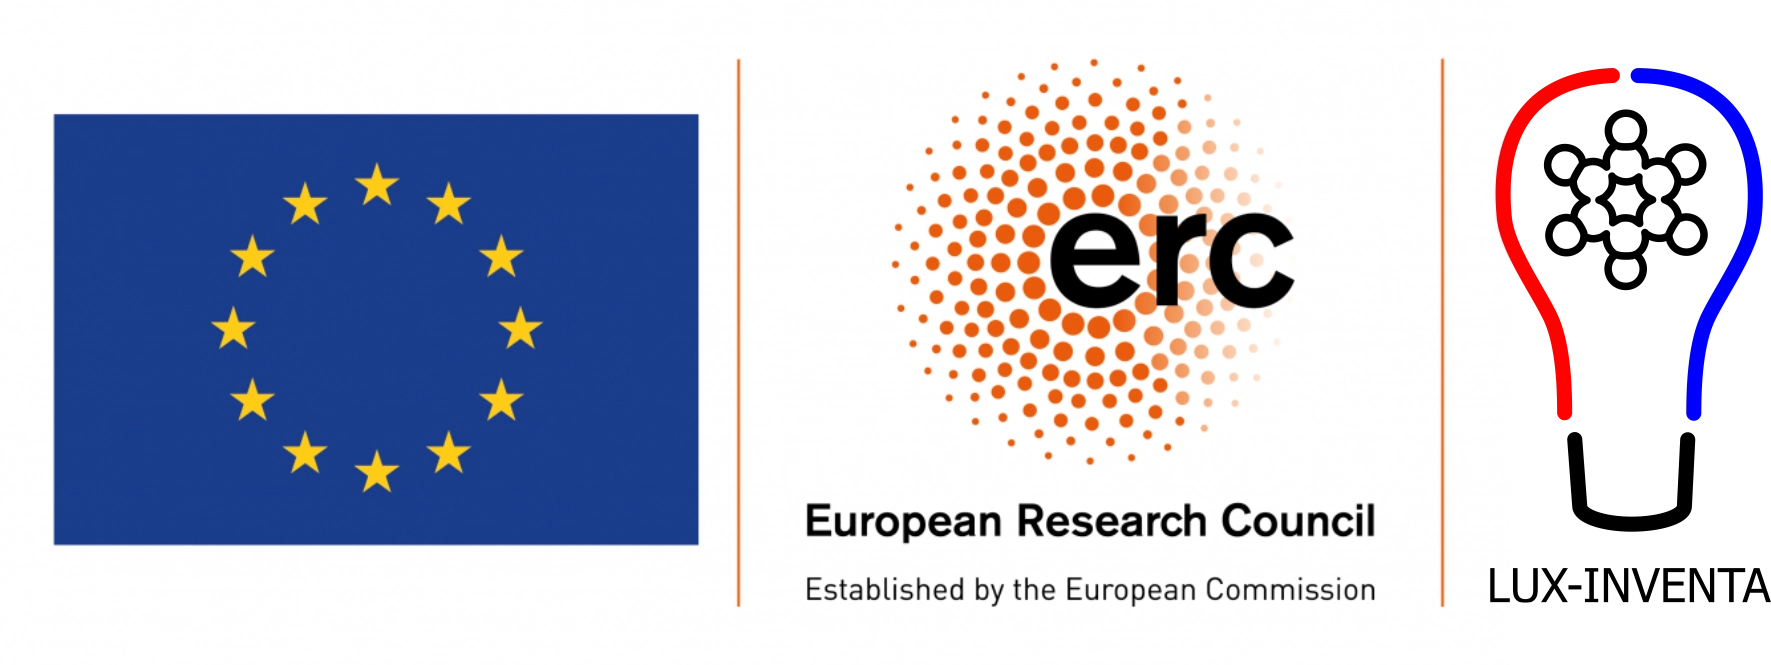 The series of signs depicting the flag of the European Union, a circle composed of twelve gold five-pointed stars on an azure background, the logo of the European Research Council, an orange sphere made of small circles, and the logo of the lux-inventa project, a light bulb with a chemical molecule in the center